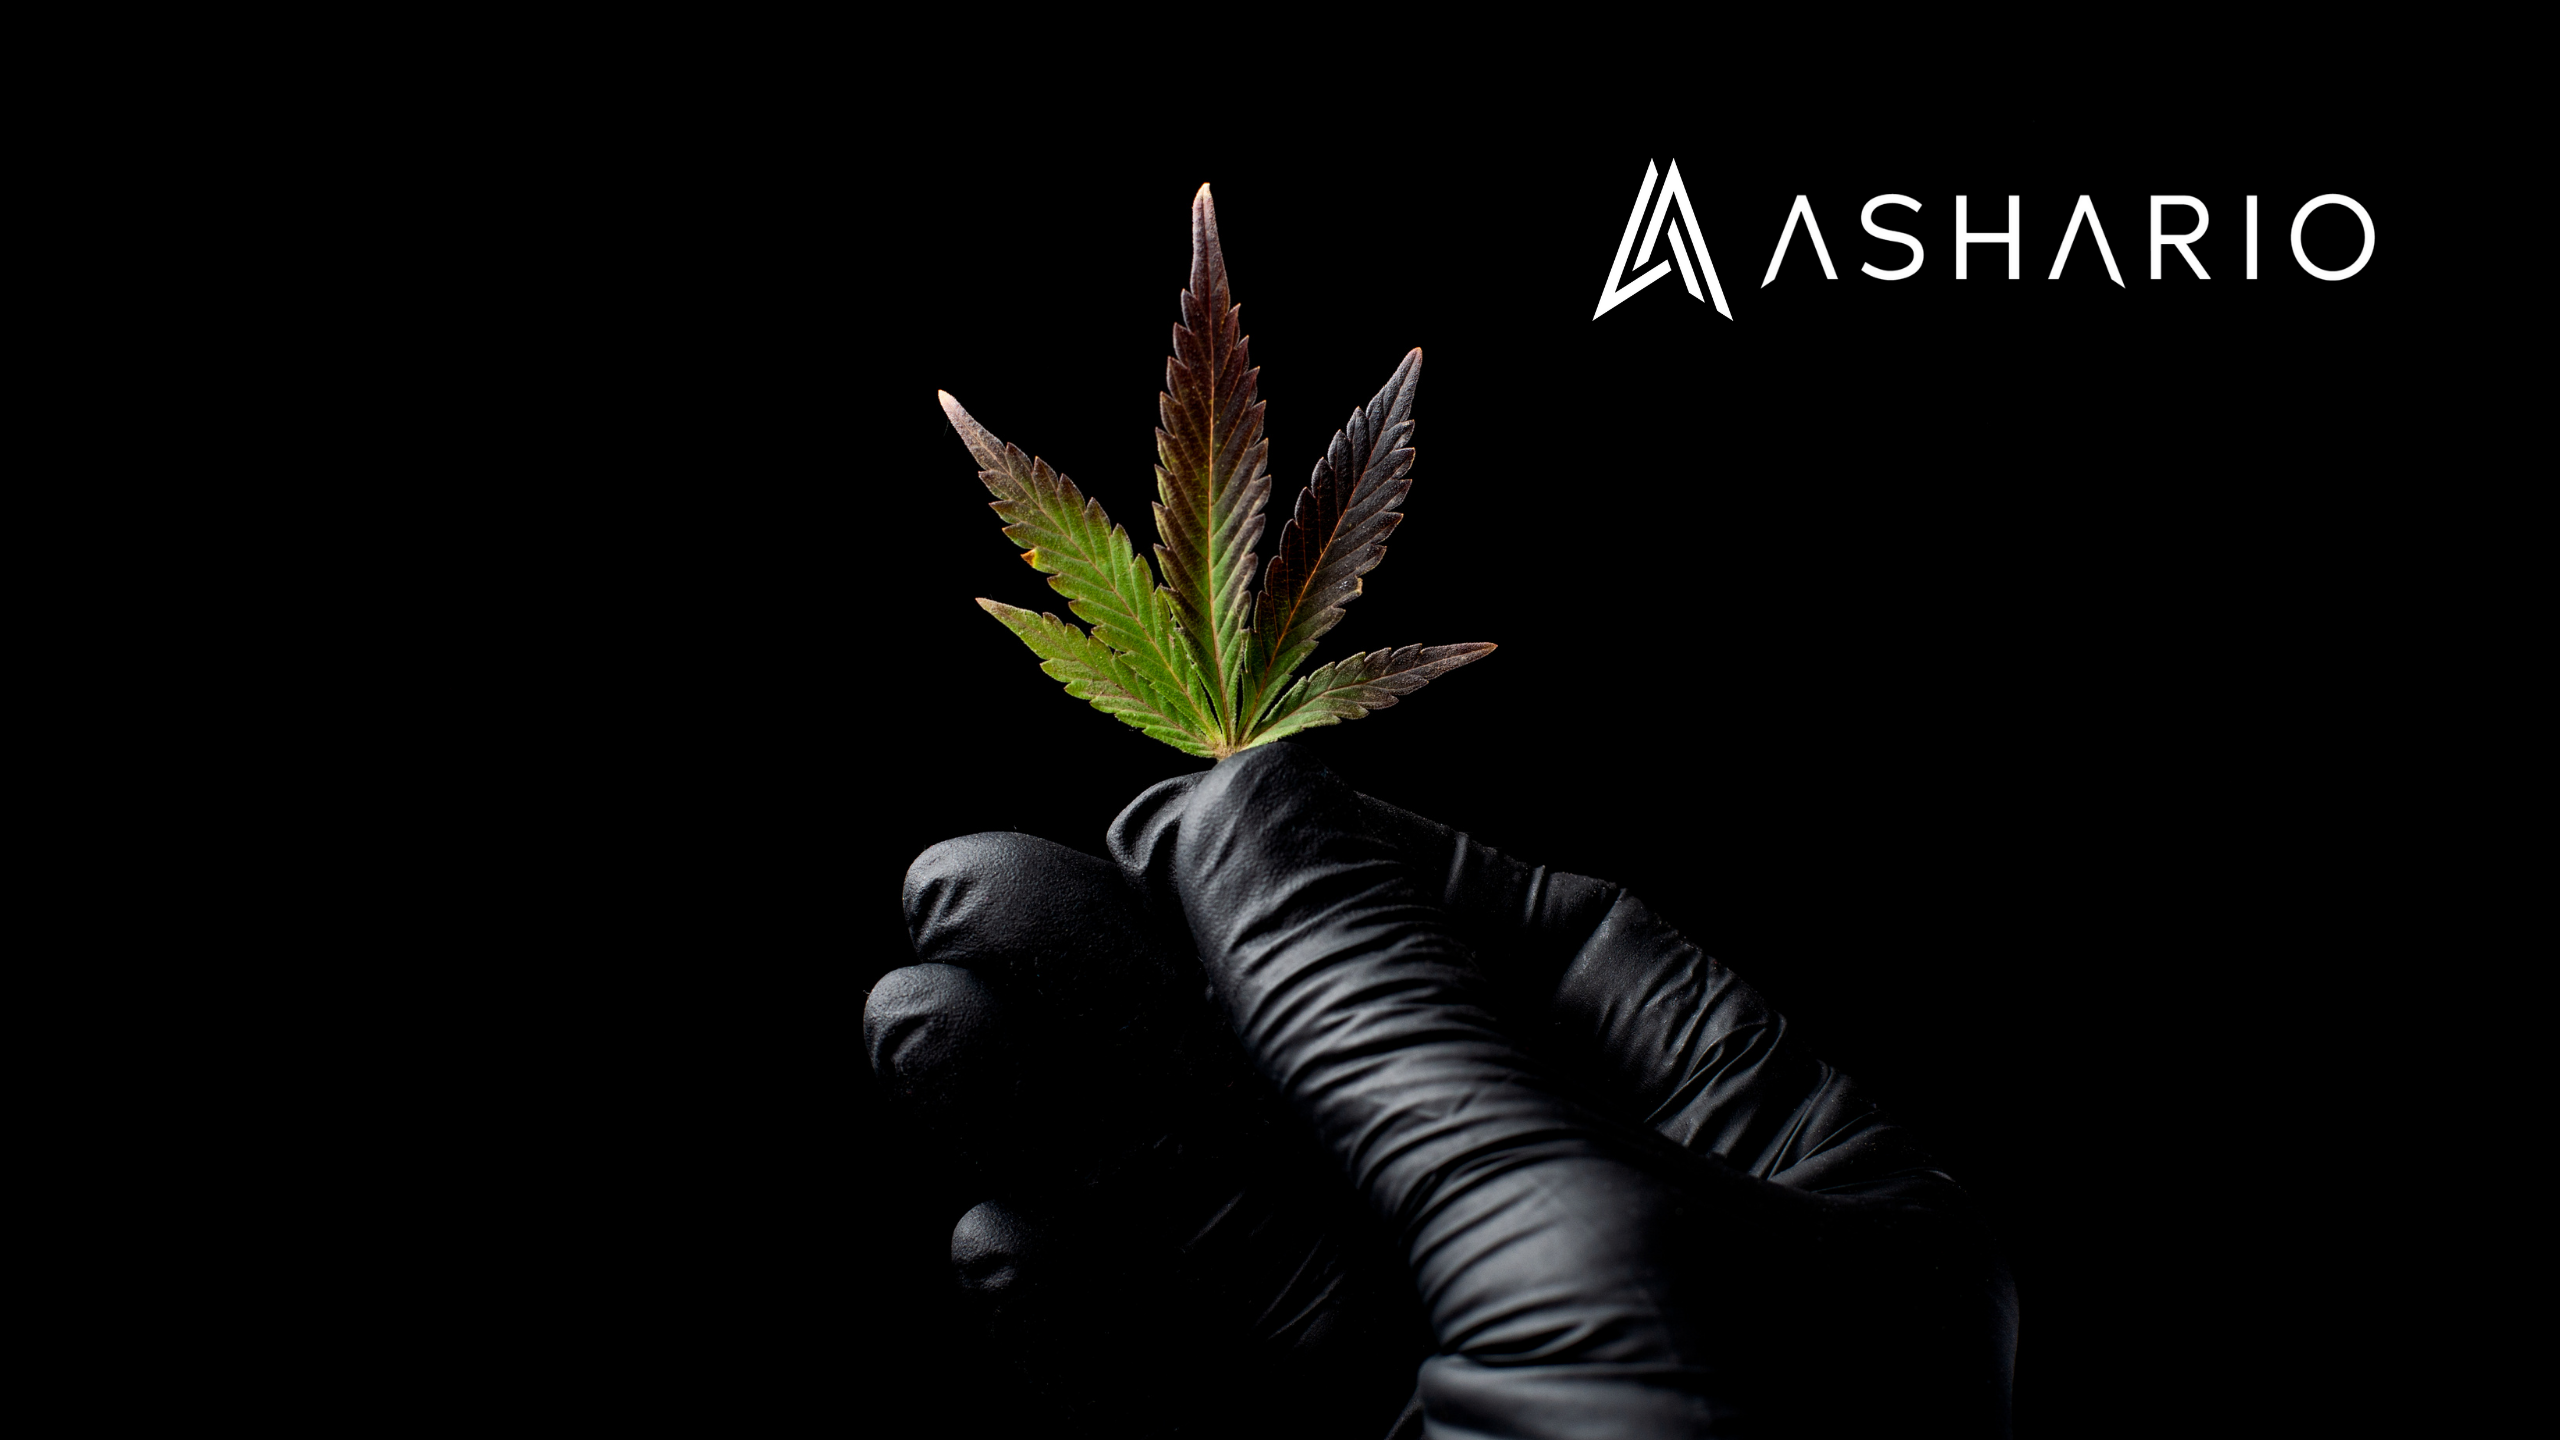 Ashario Cannabis is your licensed cannabis dispensary in North York, offering a premium selection of legal cannabis products.